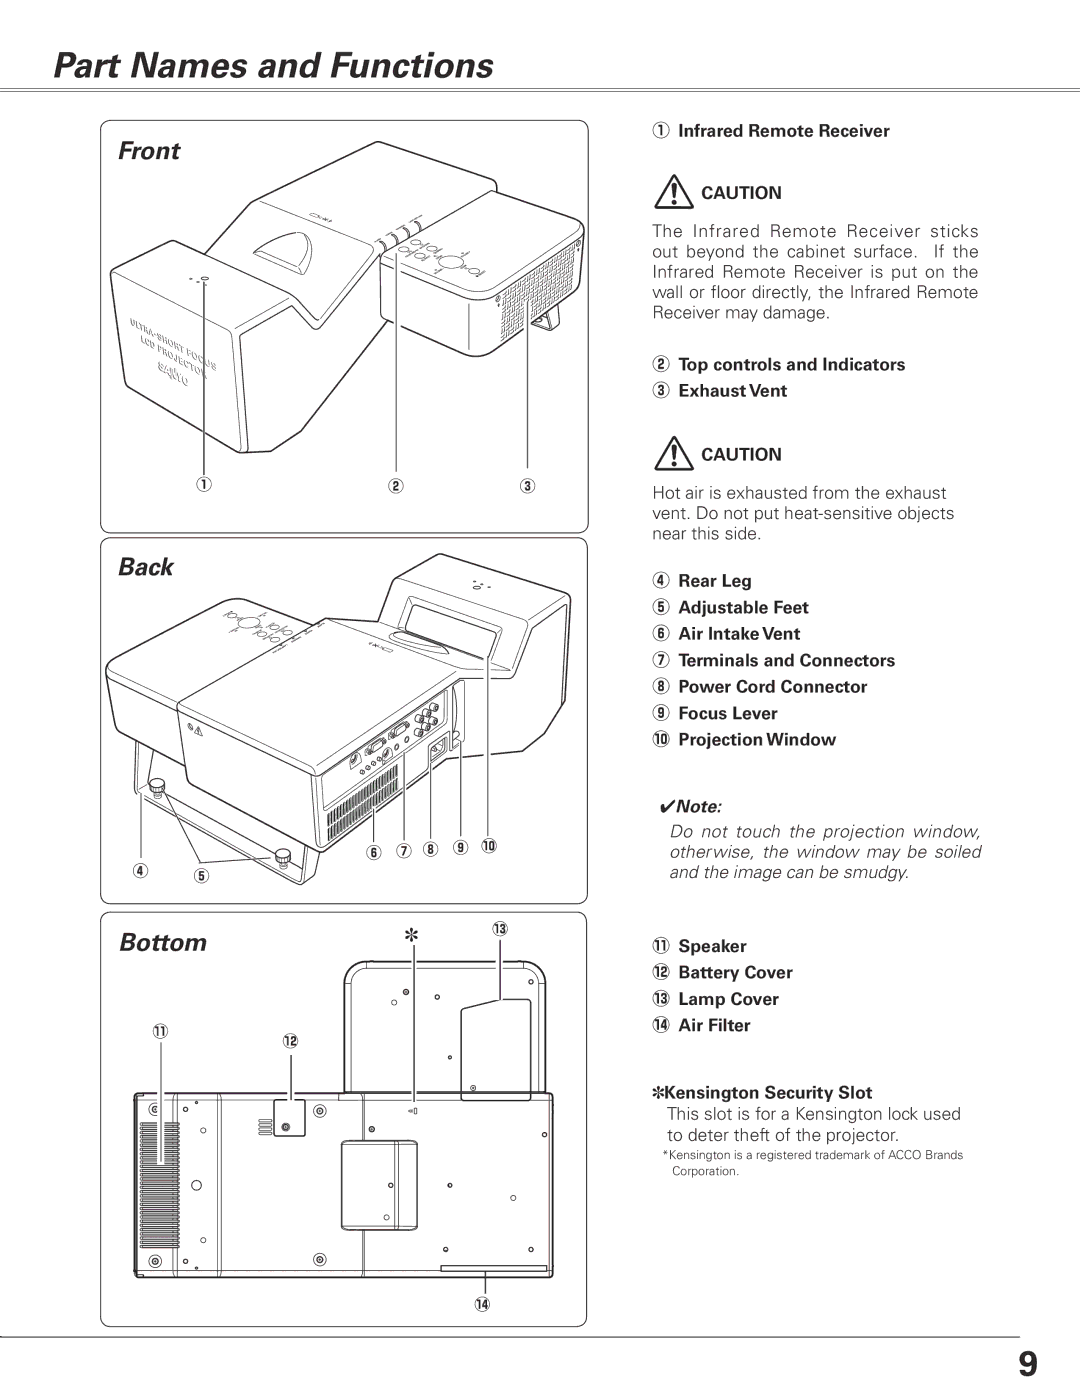 Sanyo PLC-XL50 owner manual Part Names and Functions, Front Back, Bottom, Infrared Remote Receiver 